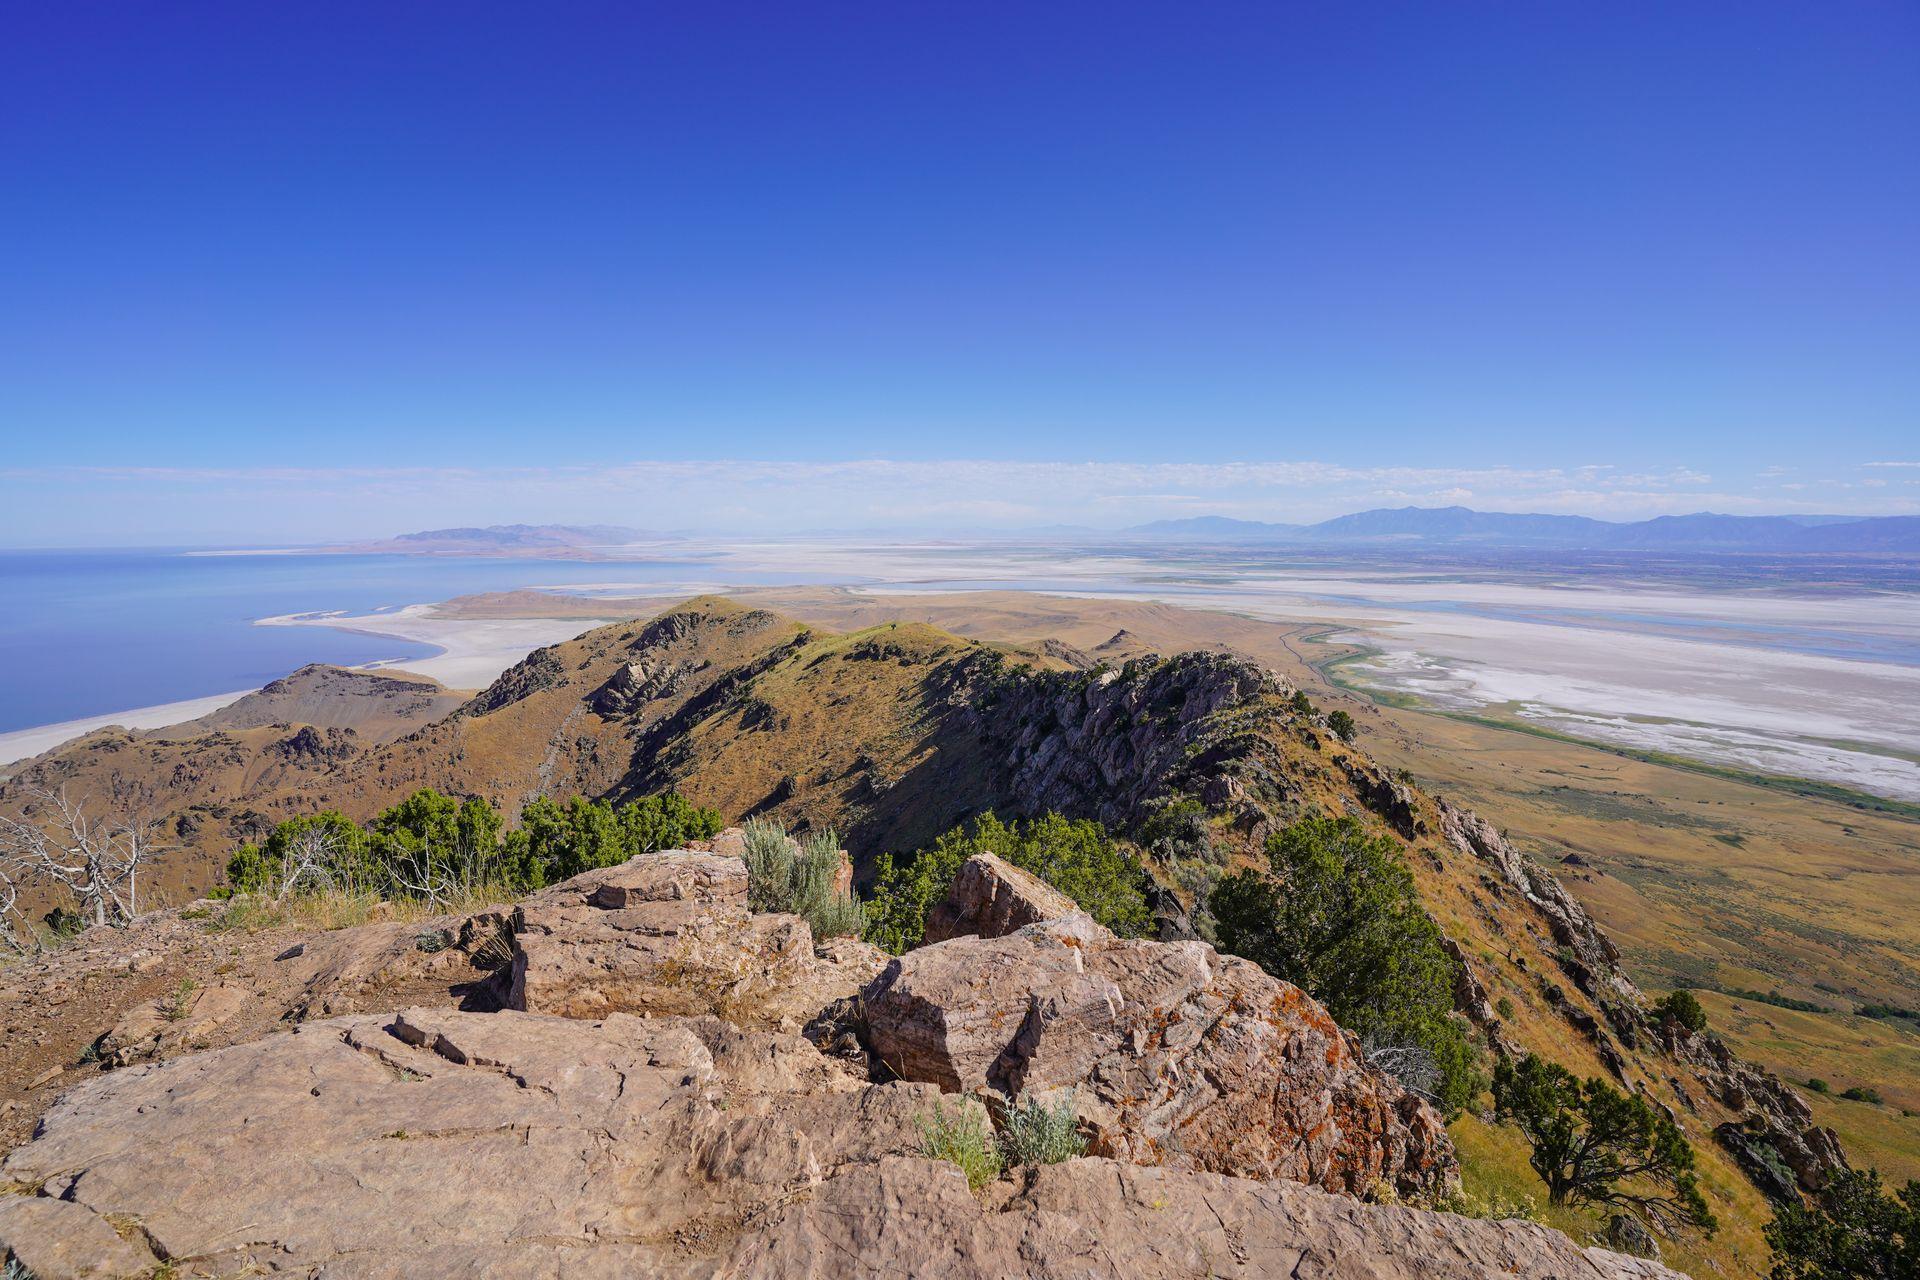 An expansive view of the Great Salt Lake from the top of Frary Peak.